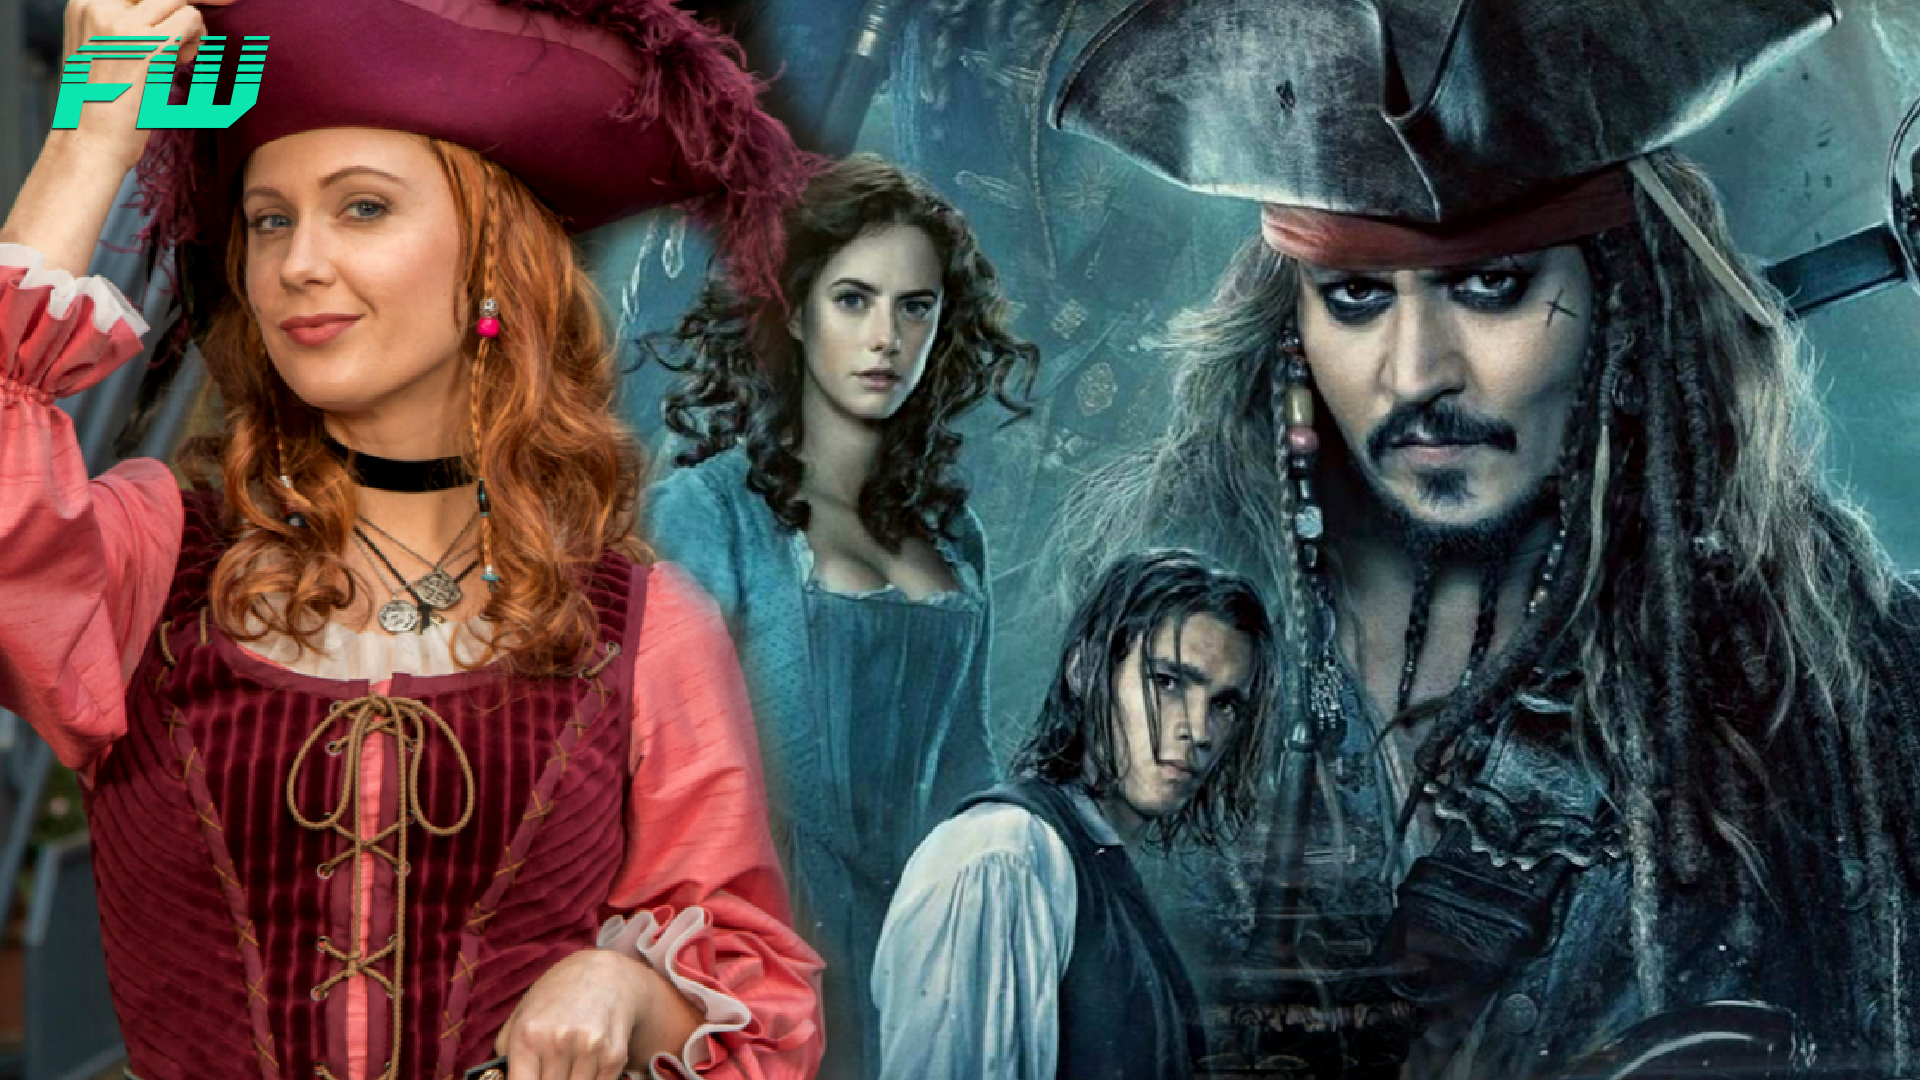 Pirates of the Caribbean Reboot To Have Female Lead